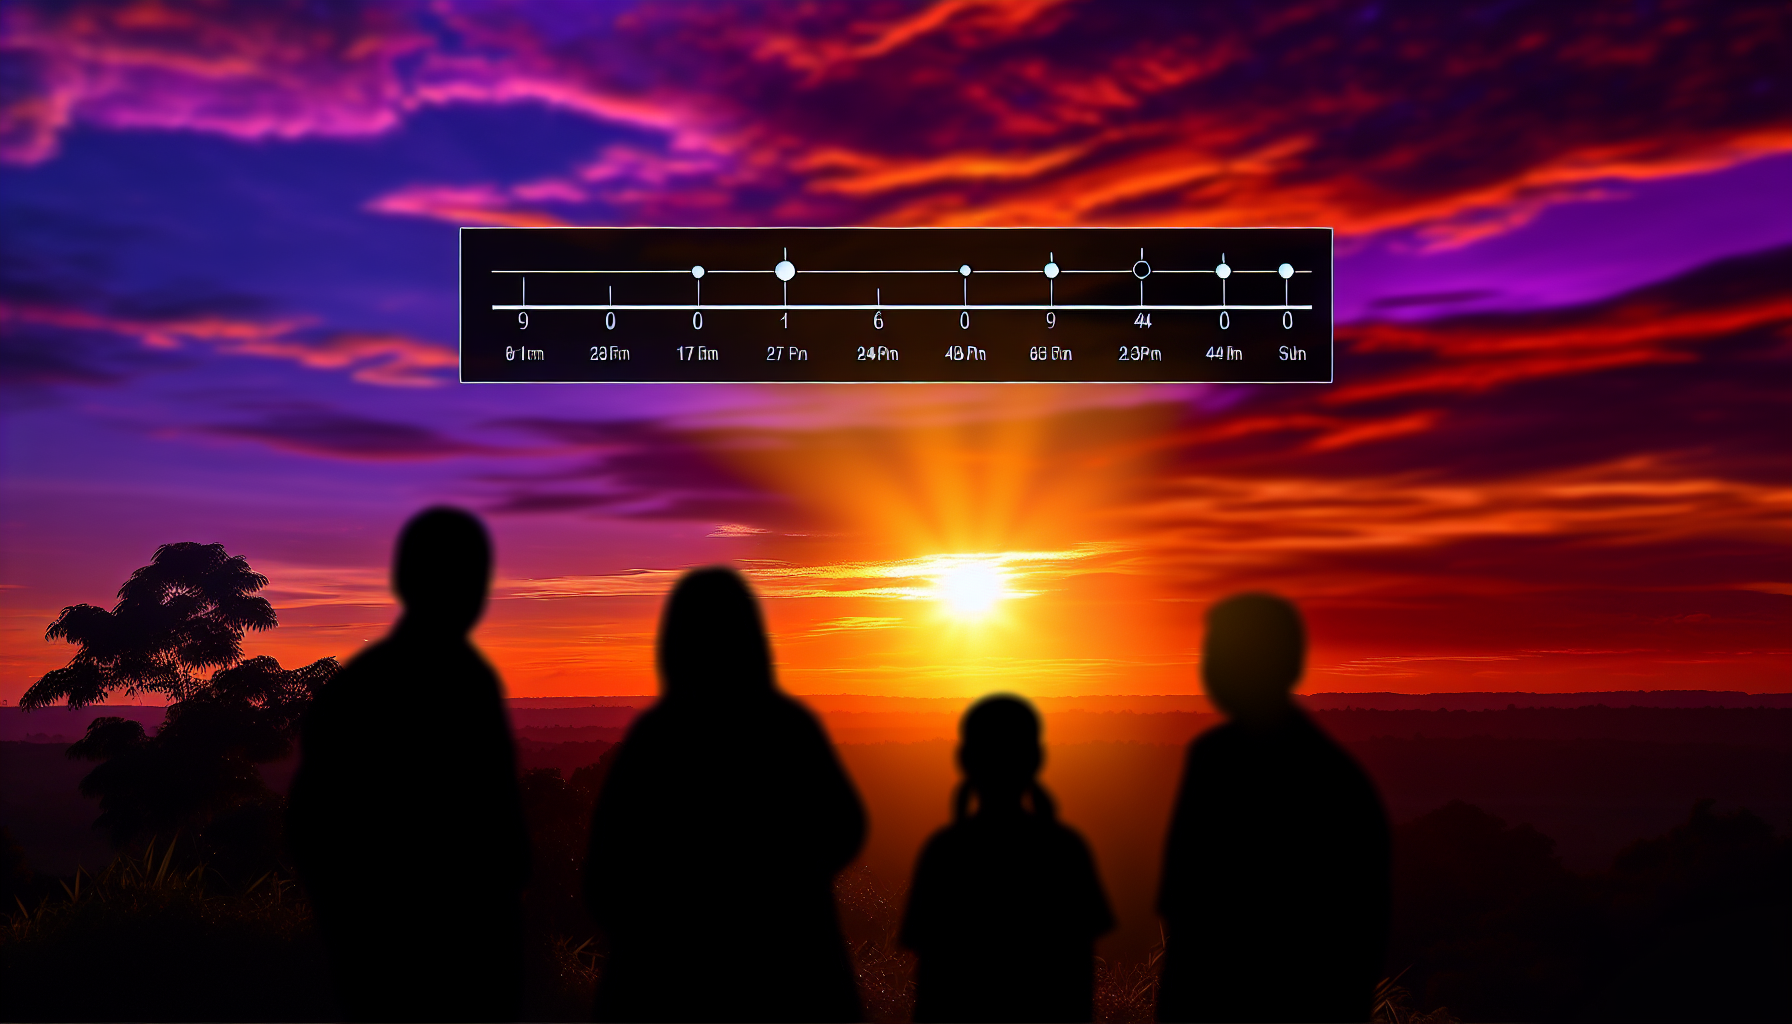 Sunset with silhouettes of people, representing divine echoes